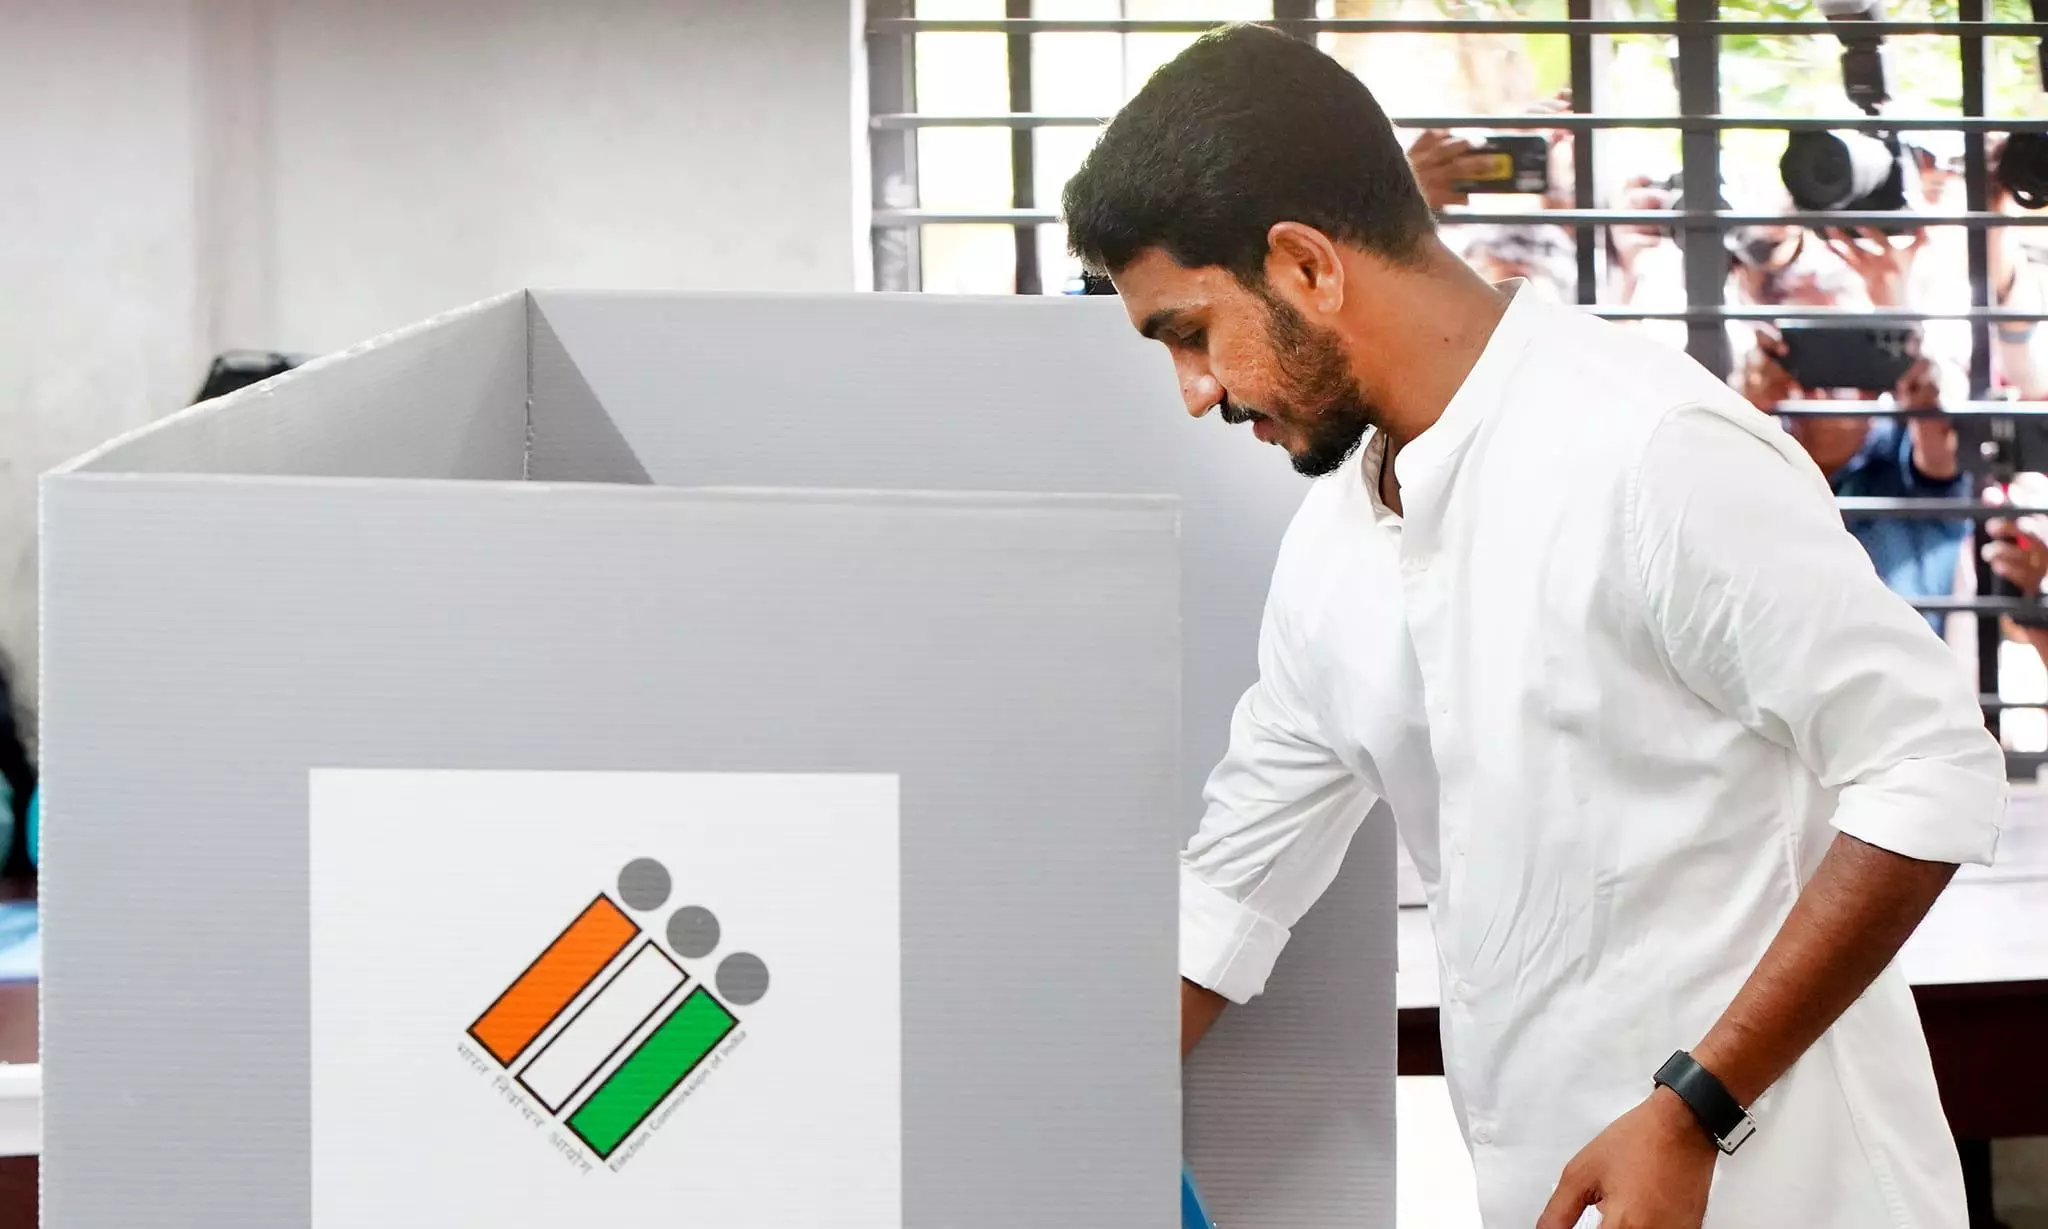 MP election: Congress seeks info on poll officials who ‘worked for’ BJP